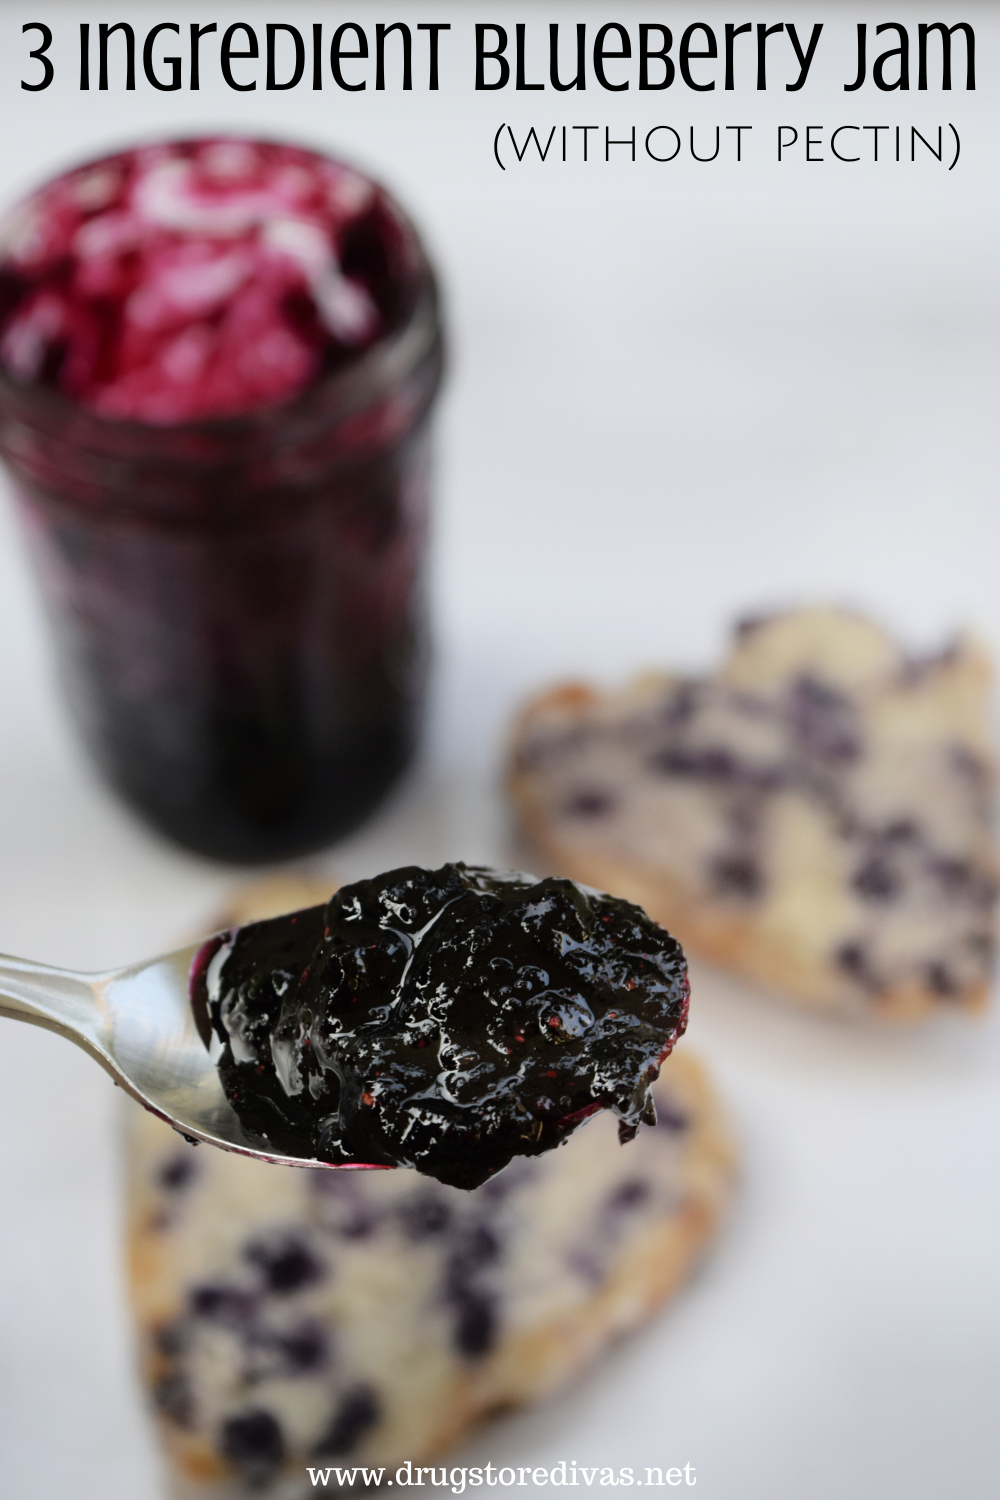 A jar of dark purple jelly, a blueberry biscuit cut in half, and a spoon of that jelly hovering over in the forefront with the words 